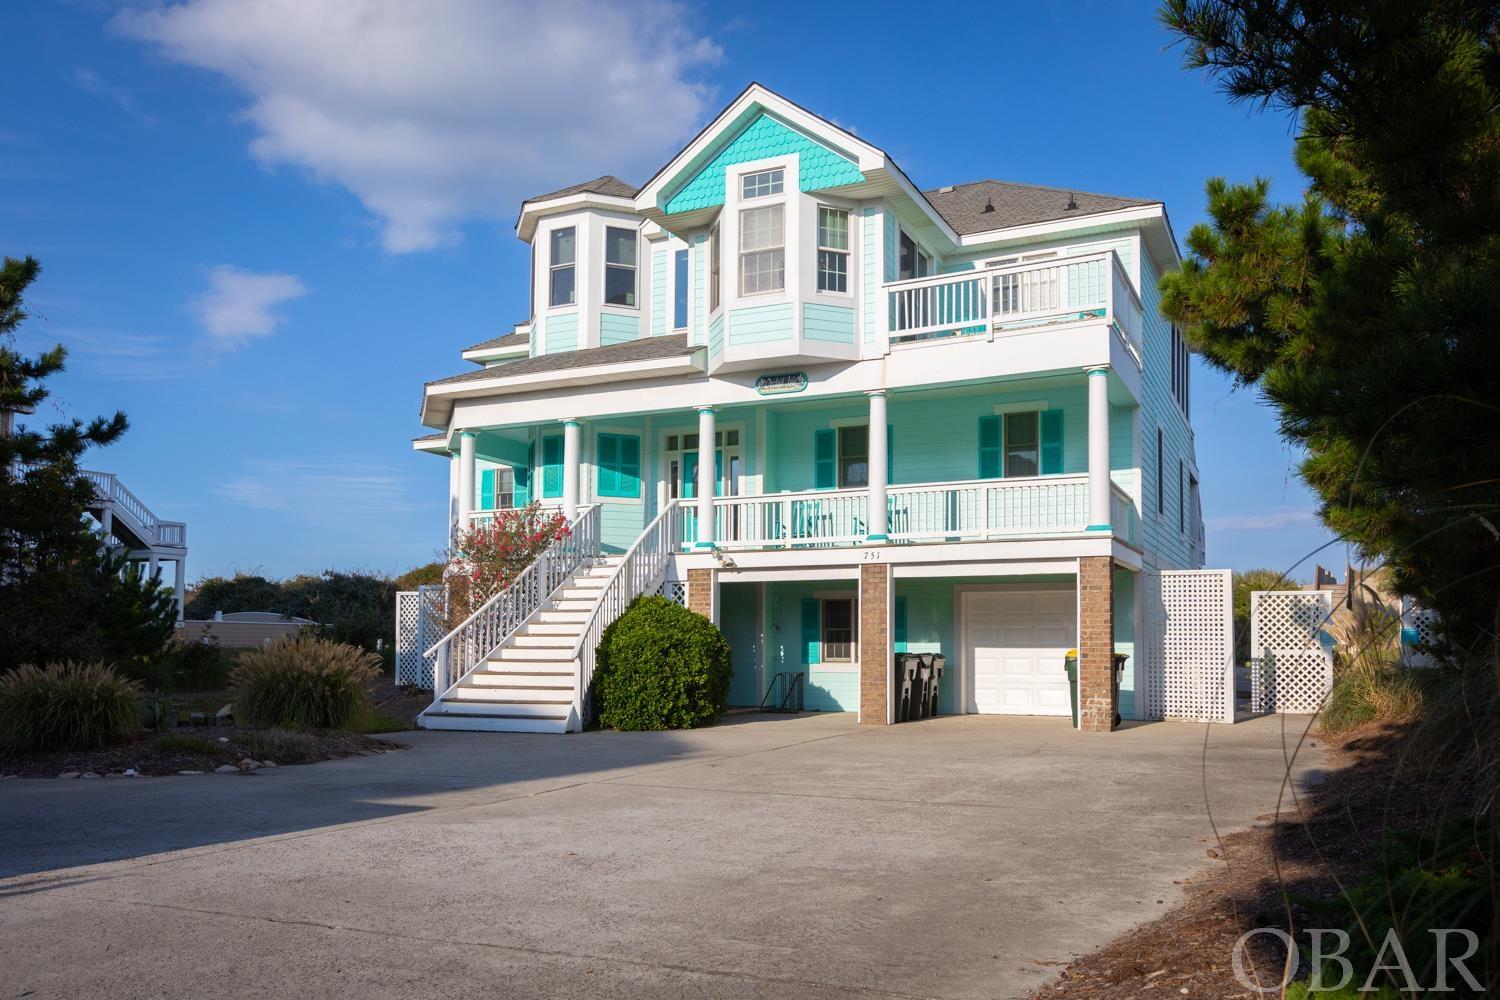 "Orchid Isle" is a premier TIER 1 OCEANFRONT 6bed/5.5bath FULLY-FURNISHED active rental w/PRIVATE OCEANSIDE POOL in BEAUTIFUL BUCK ISLAND! A grand home in a grand location. Since late Jan 2020 seller has made many recent big-ticket quality upgrades, including NEW ROOF installed Sept 14, 2023. ALSO NEW exterior PAINT; before painting, all necessary SIDING/TRIM was replaced; many WINDOWS were replaced including HUGE top-level oceanside picture windows, den SLIDER and surrounding WALLS in living area and ENSUITE KING bedroom...so you can AWAKE TO WAVES ON THE BEACH! Seller also replaced/upgraded POOL lip/edge with travertine, and installed NEW larger POOL PUMP/FILTER. Installed ALL NEW COMPOSITE TOP and MID-LEVEL DECKING & STAIR TREADS. Moved HOT TUB to pool area for wider usage of it and the expansive MID-LEVEL COVERED DECK. Built separate 8x7 lockable OWNER'S STORAGE in rear of garage (still plenty of garage space for bikes, beach toys, etc.). OUTDOOR SHOWER was upgraded and LANDSCAPING was redone. Large rooms and THREE KING ENSUITES. Victorian-inspired covered FRONT ROCKING PORCH; in rear, all oceanside decks lead down to pool and dune beach walkover! Buck Island is a planned development with fantastic private amenities, accessed by a securely-gated entrance, down a winding lit, tree-lined street with turtle ponds dotted alongside. Shared dune walkover with only one neighbor, at southernmost end for more private-feeling beach relaxation. INCOME CAN BE HIGHER--seller limits open weeks to only June, July & August AND takes personal in-season weeks (totaling approx $10k each year in 2021 & 2022, and about $23k in 2023). See TWO nearly identical Professional local management projections on file--estimates for $186,000+ gross if calendar is expanded!